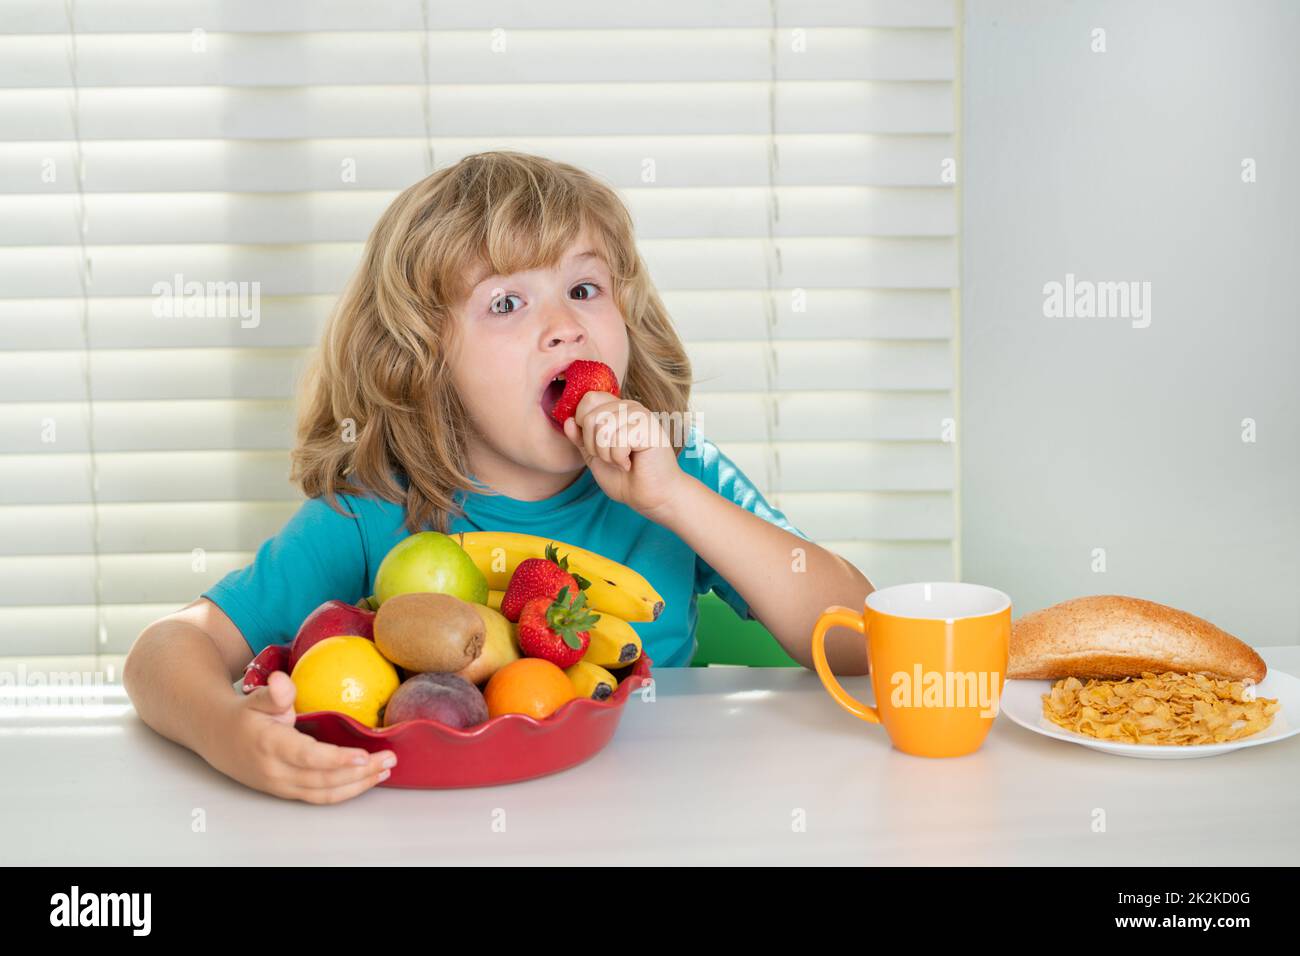 Child with strawberry, summer fruits. Child in the kitchen at the table eating vegetable and fruits during the dinner lunch. Healthy food, vegetable Stock Photo